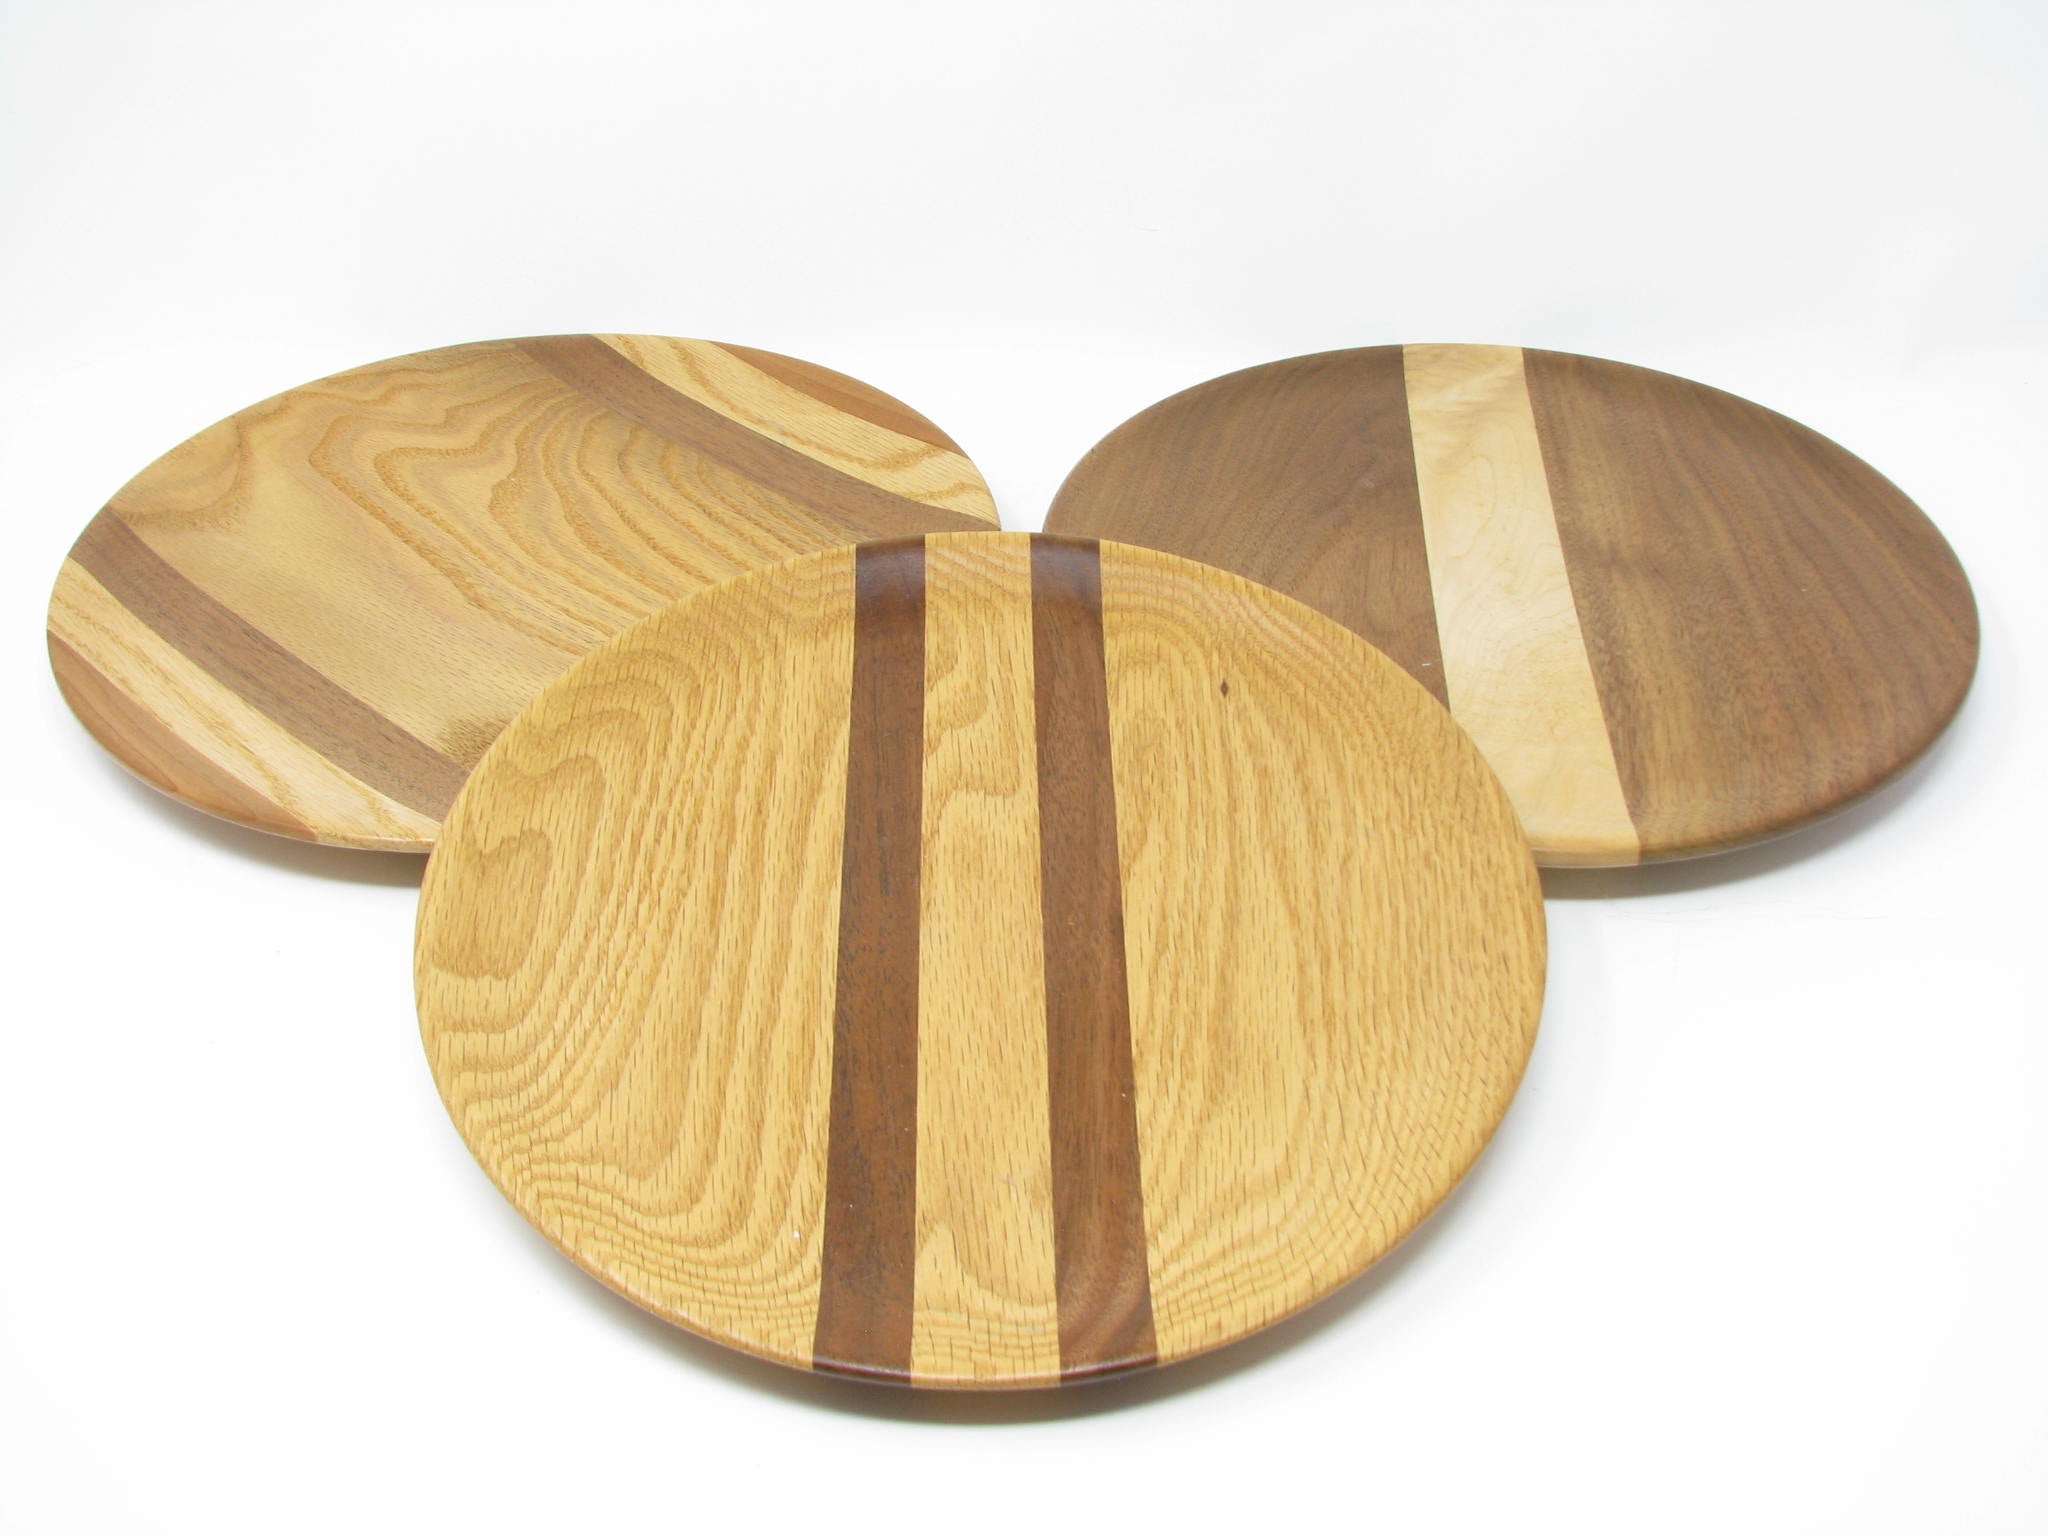 edgebrookhouse - Hand-Turned Inlaid Wood Plates by Sawdust Shop  - 3 Pieces